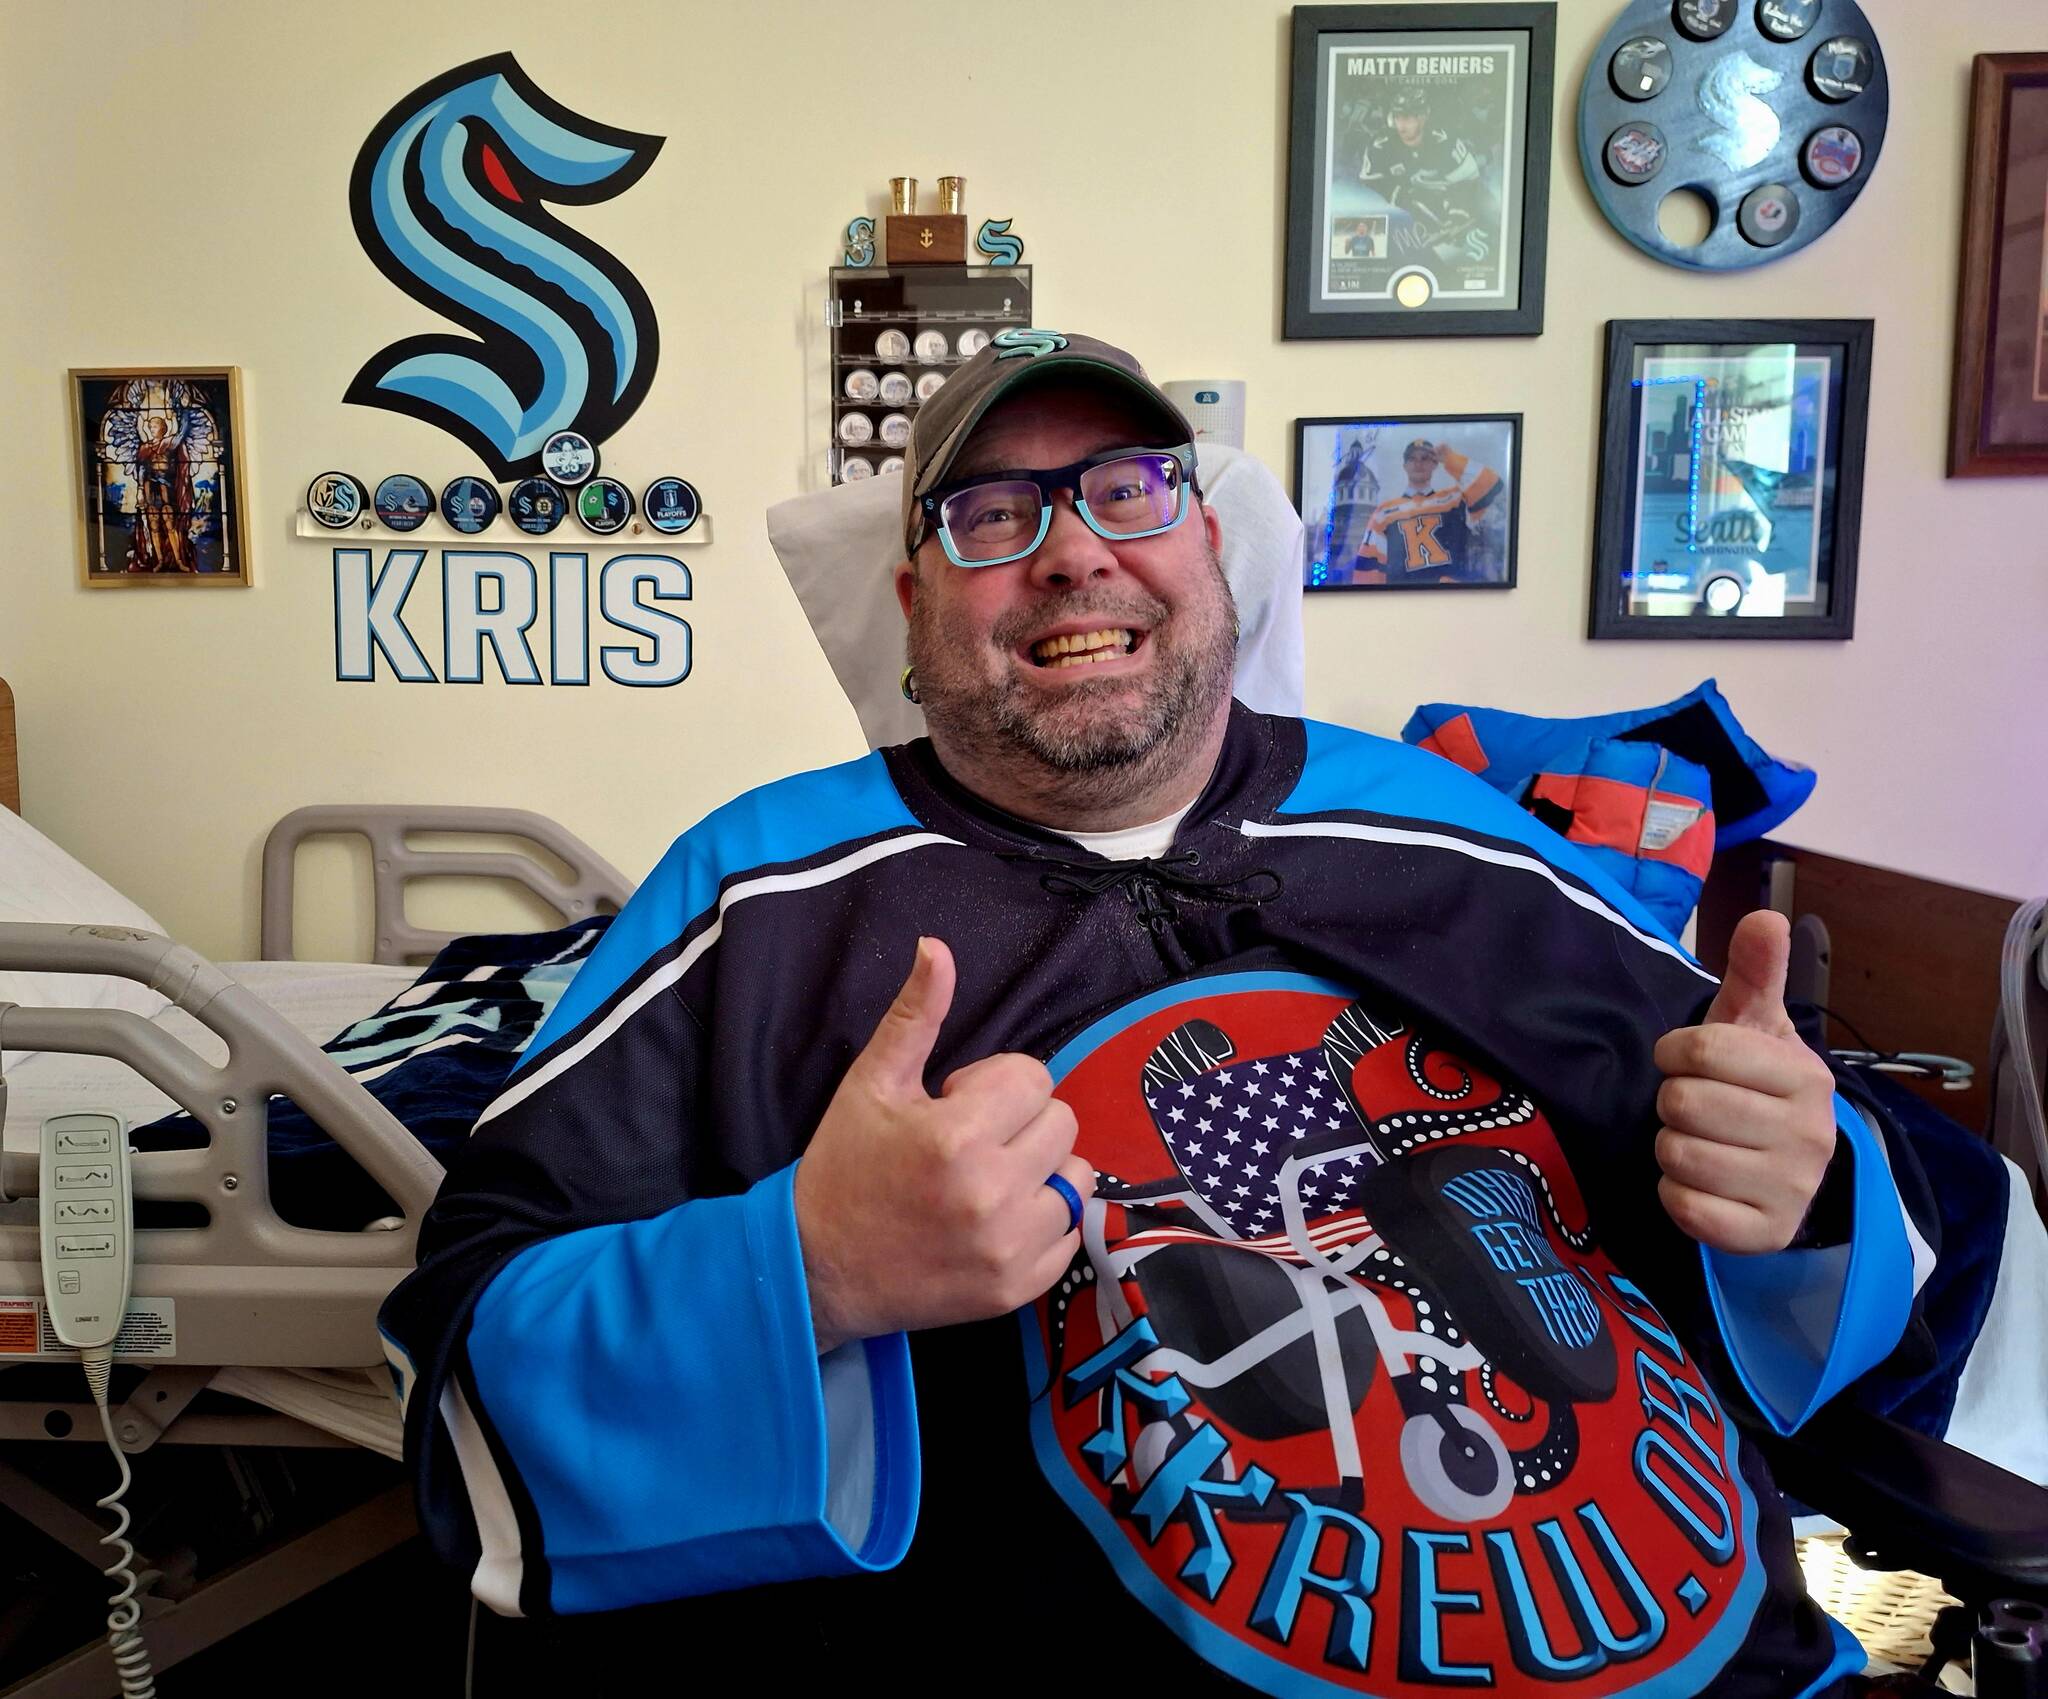 Elisha Meyer/Kitsap News Group
Kris Boudreau shows off his sports memorabilia collection, as well as his signature greeting.